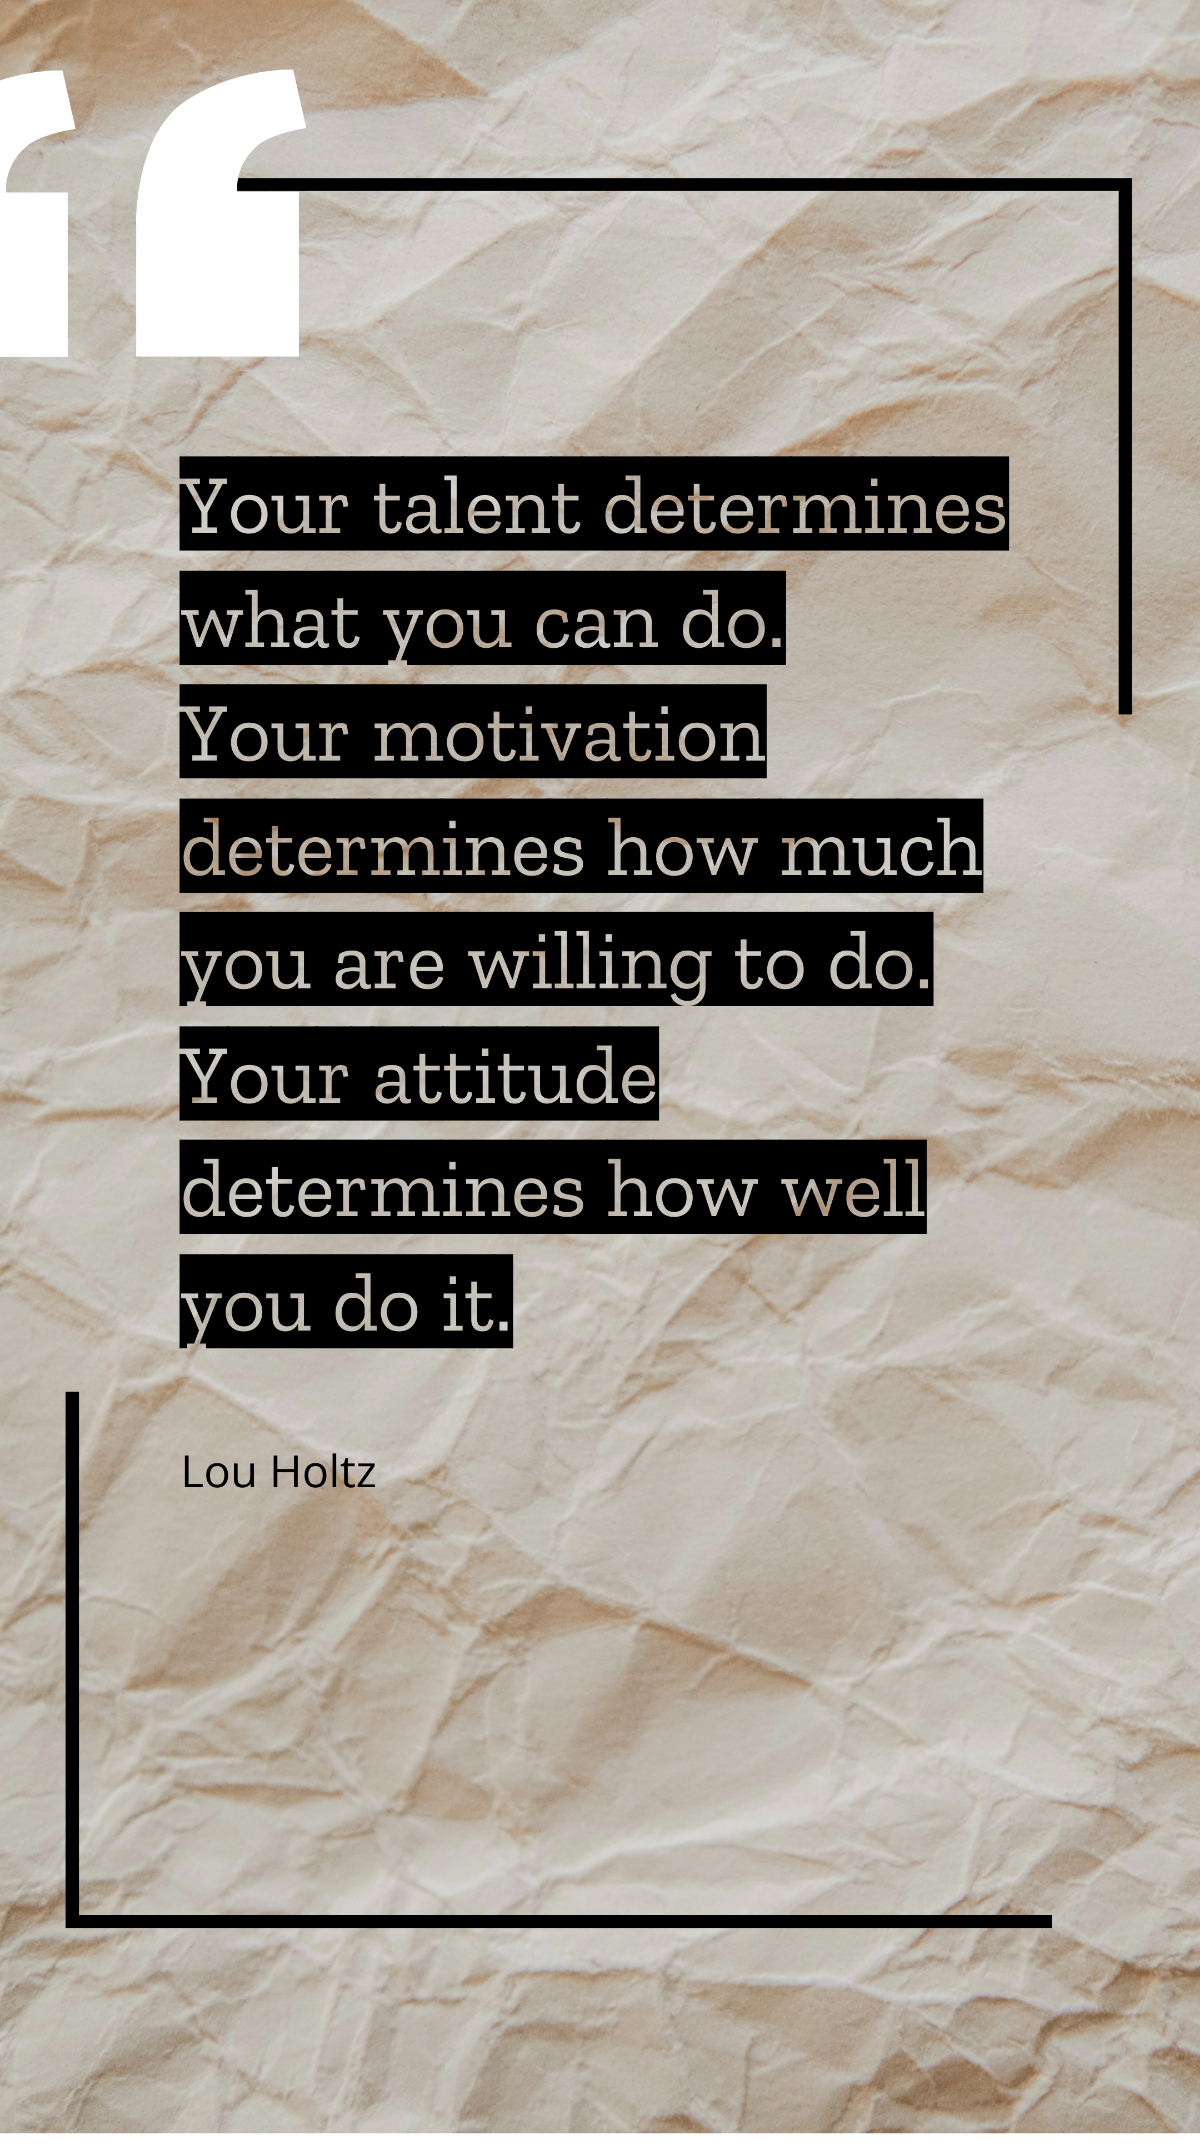 Lou Holtz - Your talent determines what you can do. Your motivation determines how much you are willing to do. Your attitude determines how well you do it. Template